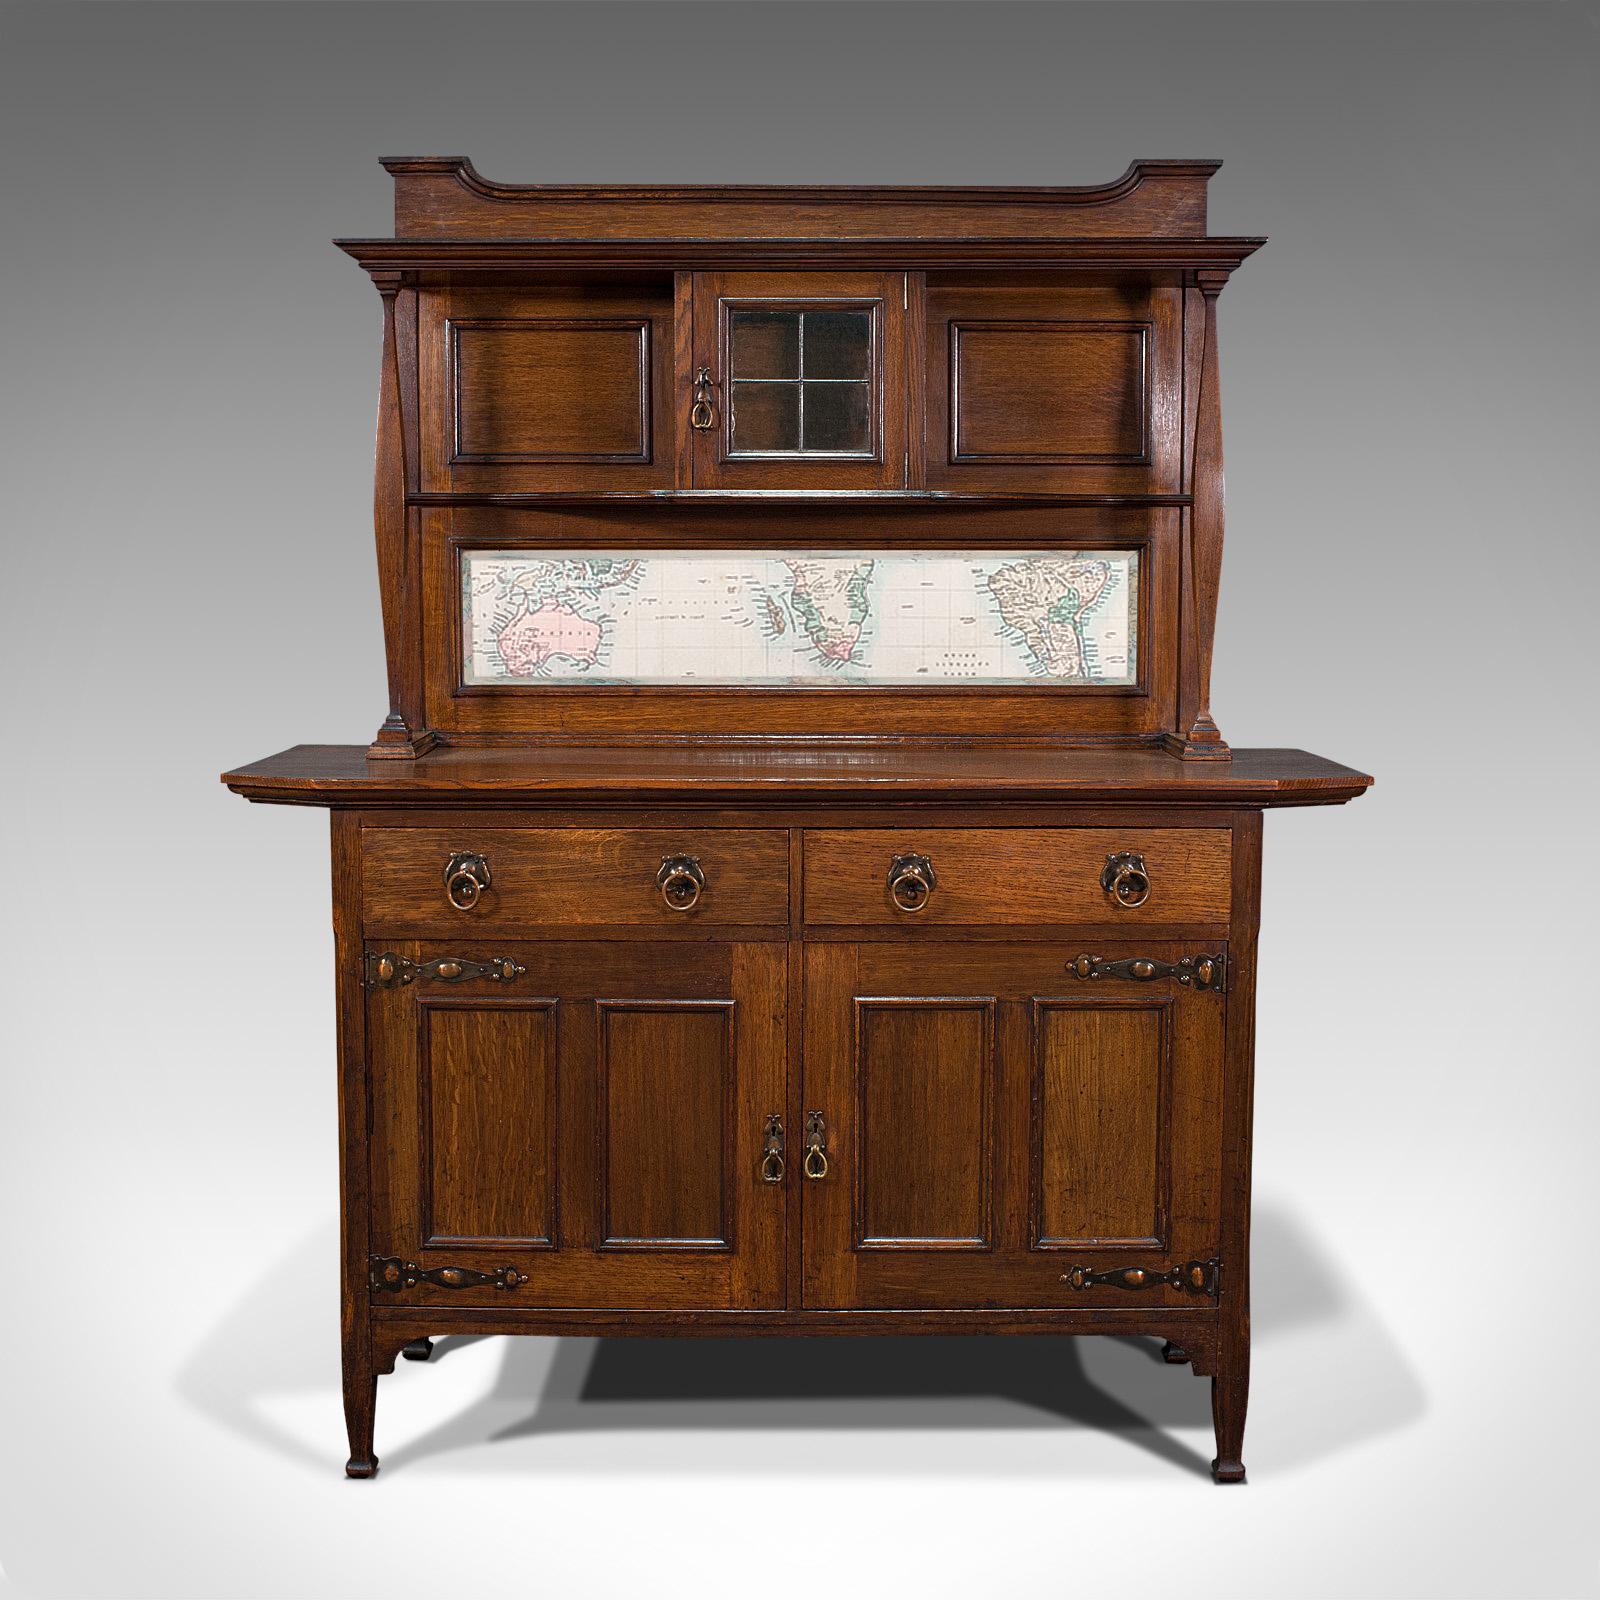 This is a large antique sideboard. An English, oak dresser cabinet by Liberty and Co in the Arts & Crafts taste, dating to the late Victorian period, circa 1900.

Captivating sideboard of superb quality and form
A classic Liberty & Co, London